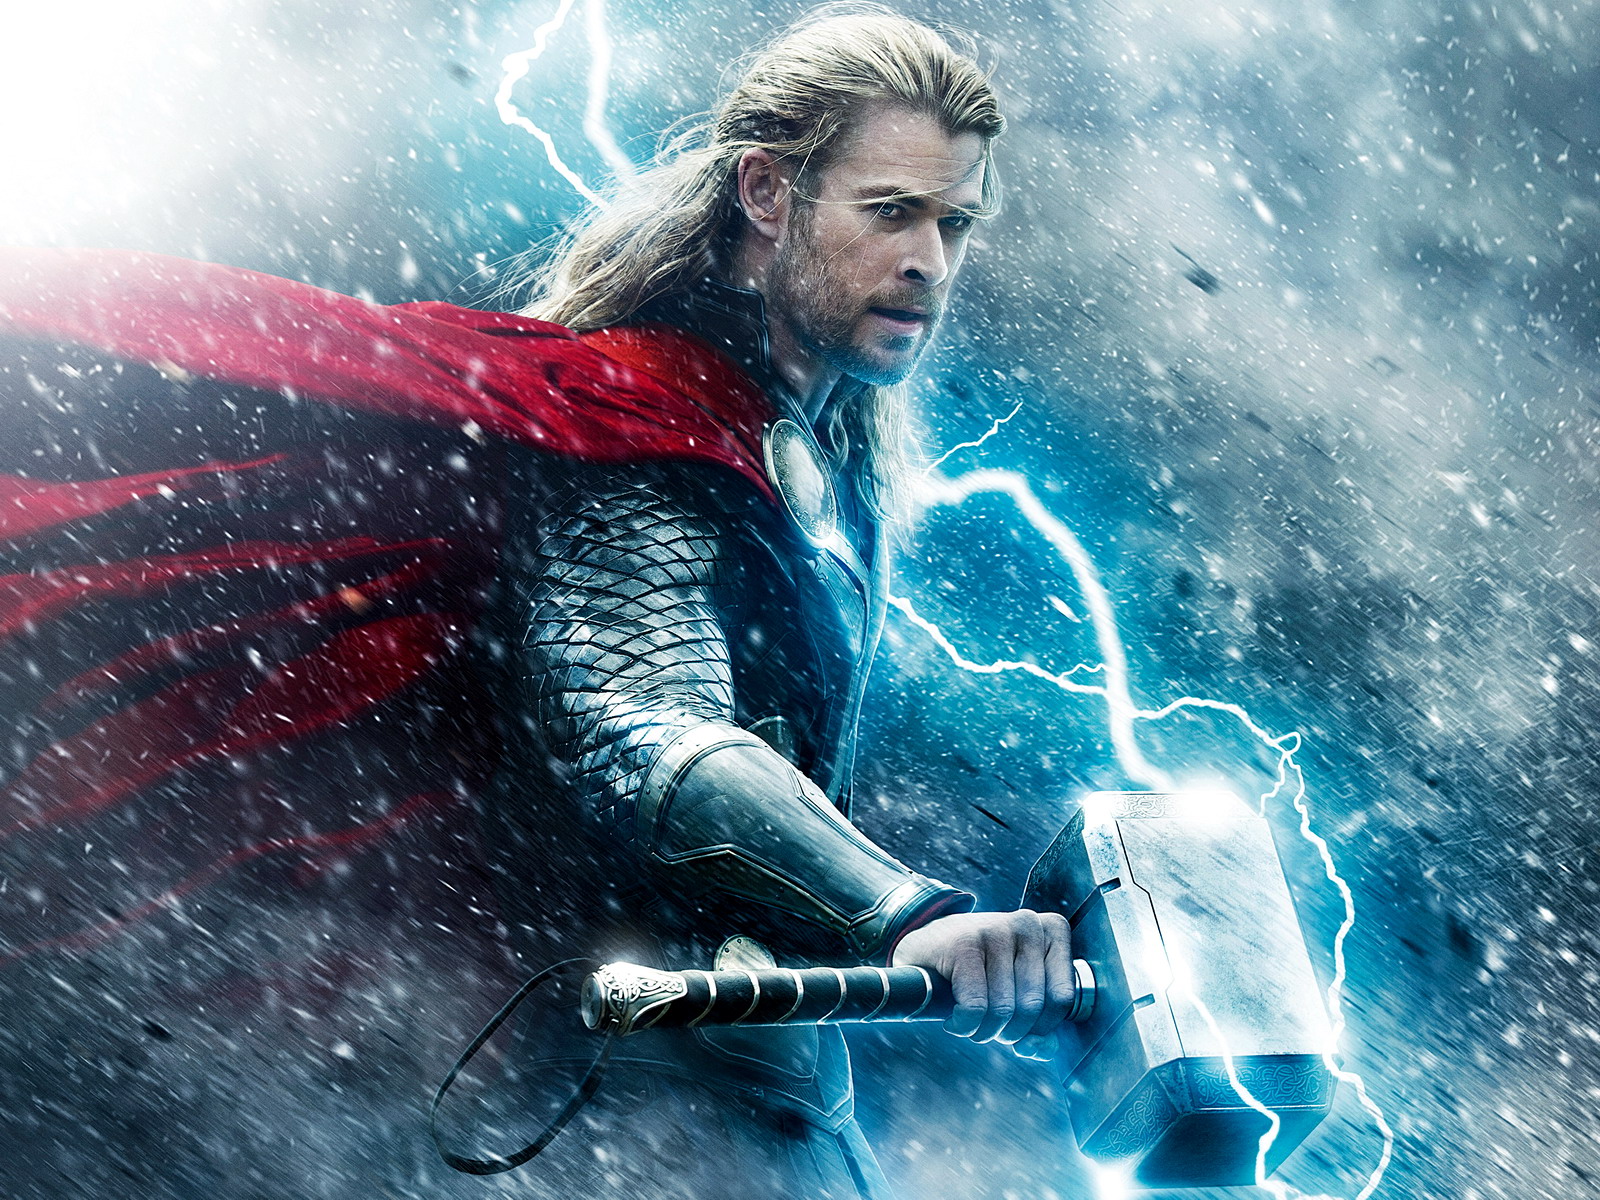 Download High quality Thor The Dark World wallpaper / Movies / 1600x1200